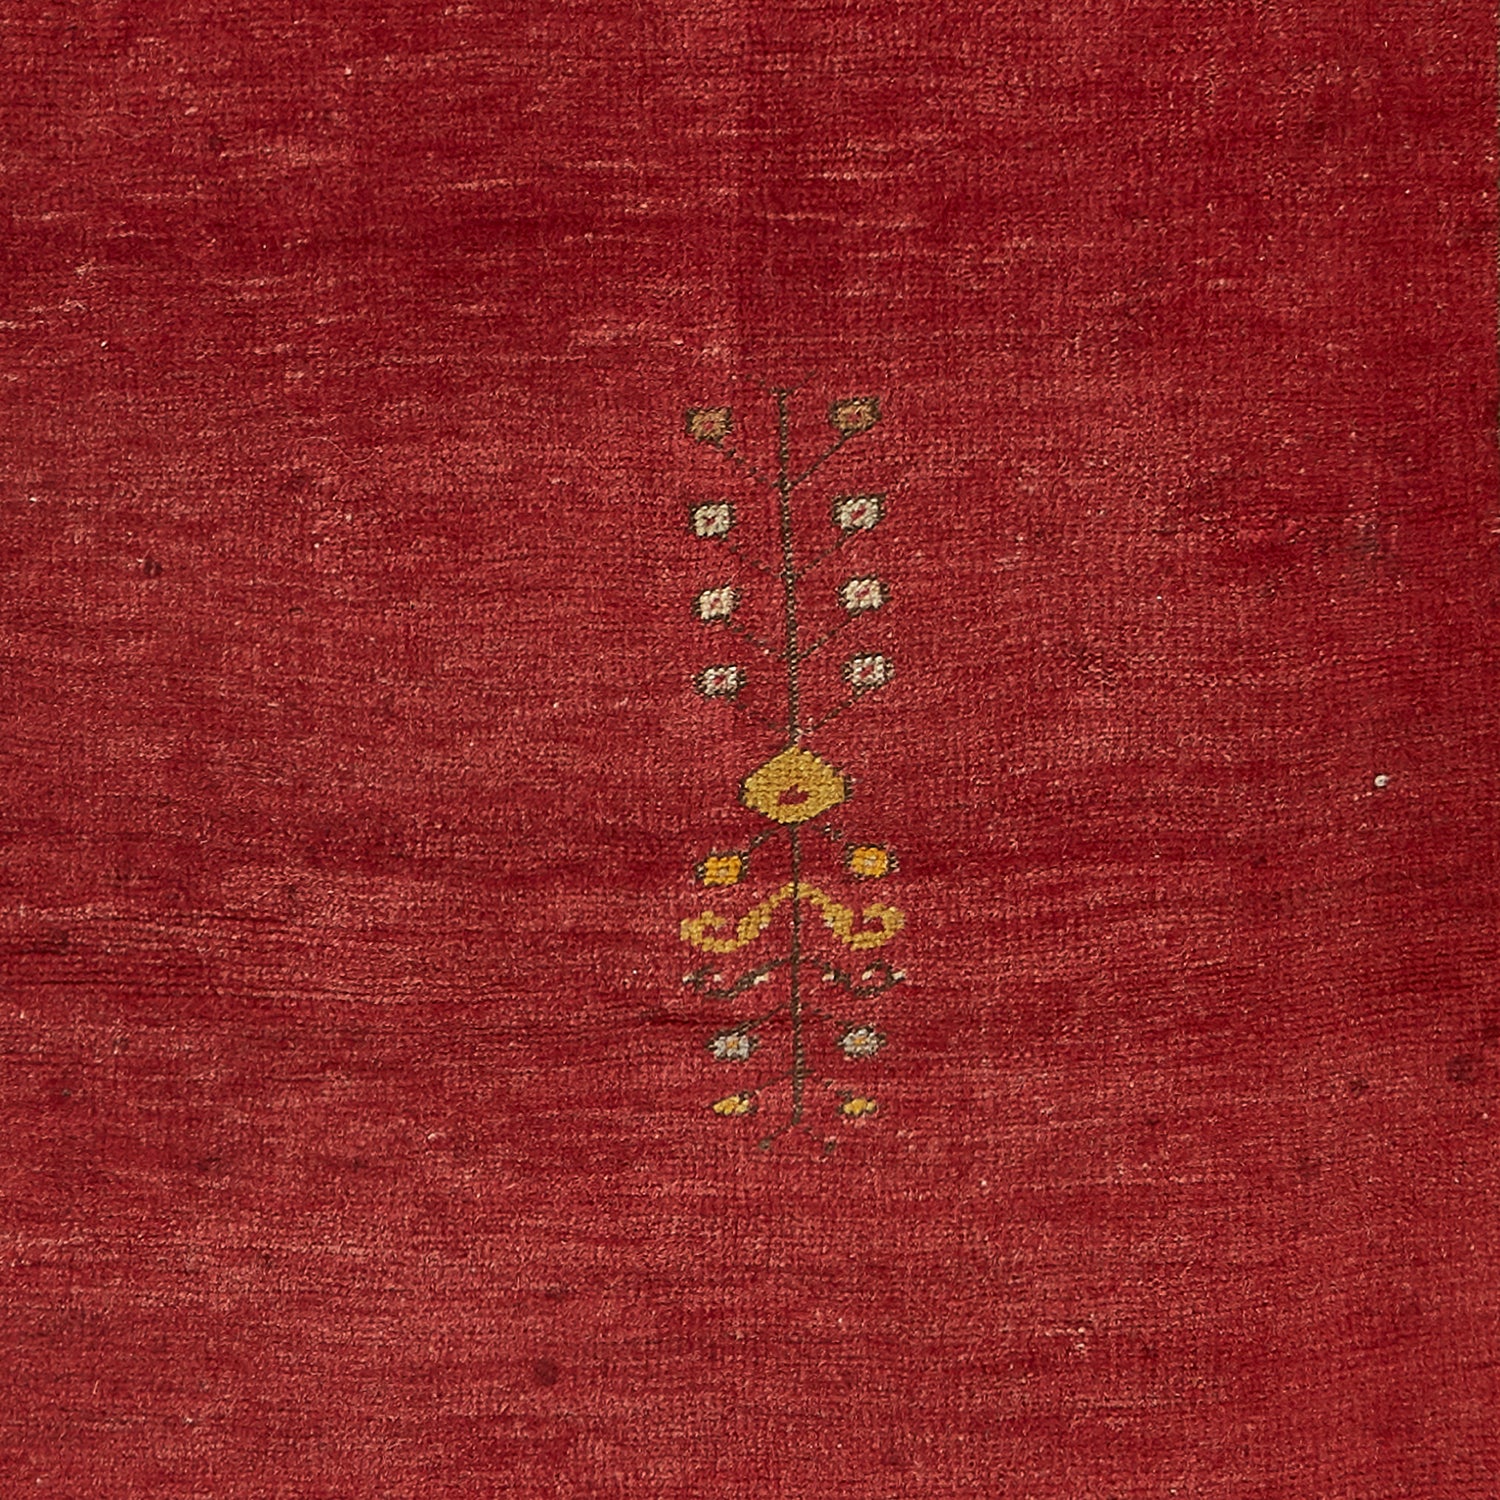 Handcrafted ethnic textile featuring a red background with contrasting motifs